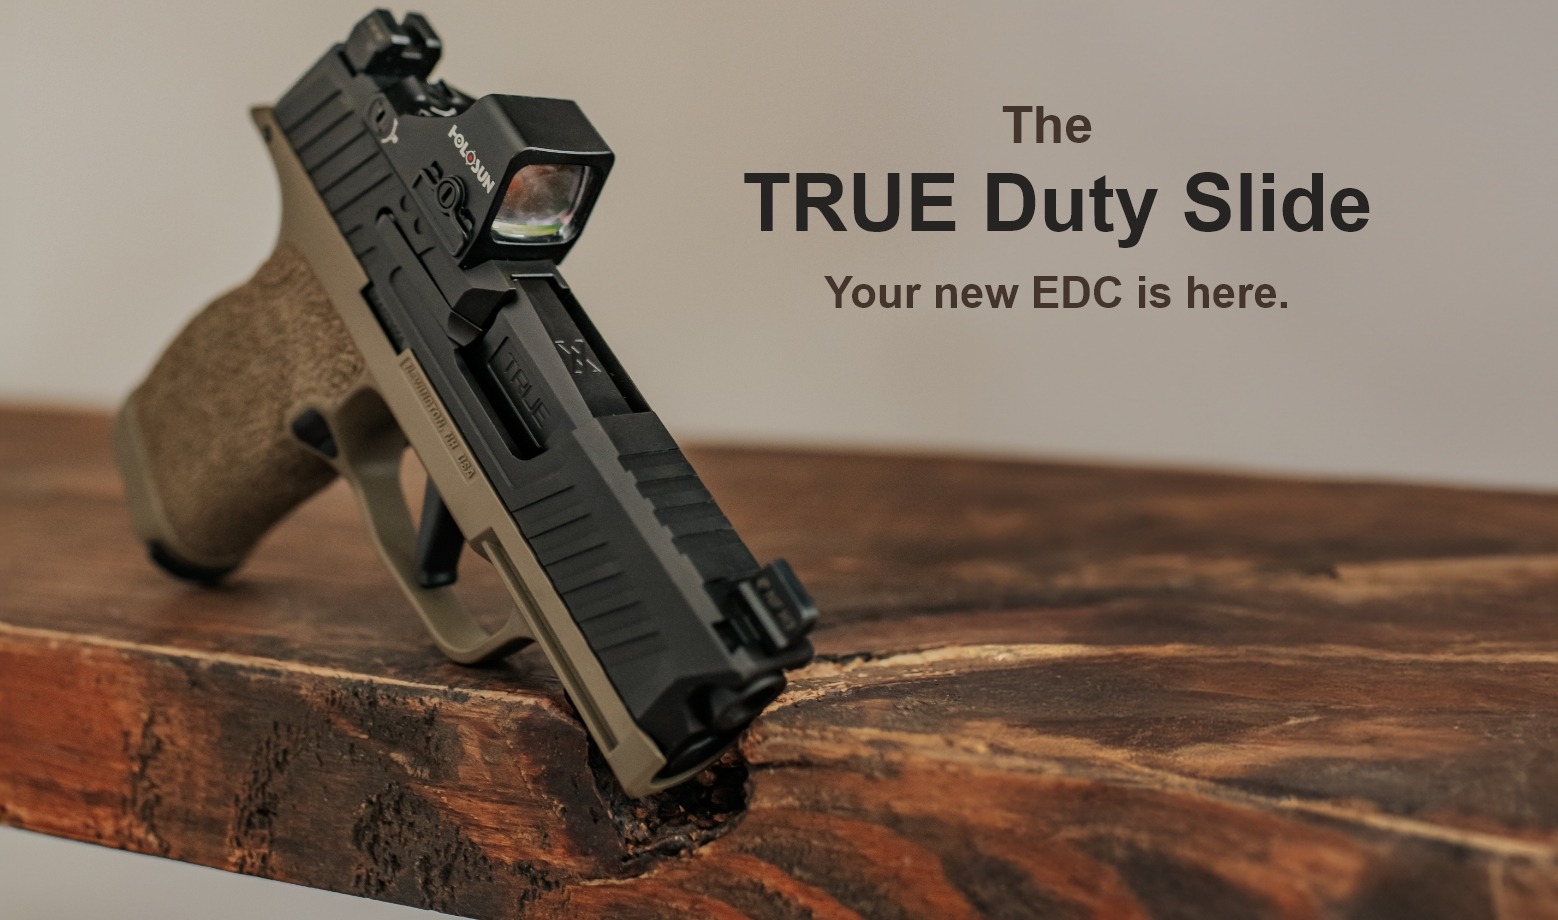 SIG Sauer P365 with TRUE Duty Slide and red dot sight, 'Your new EDC is here' text, on wooden surface.